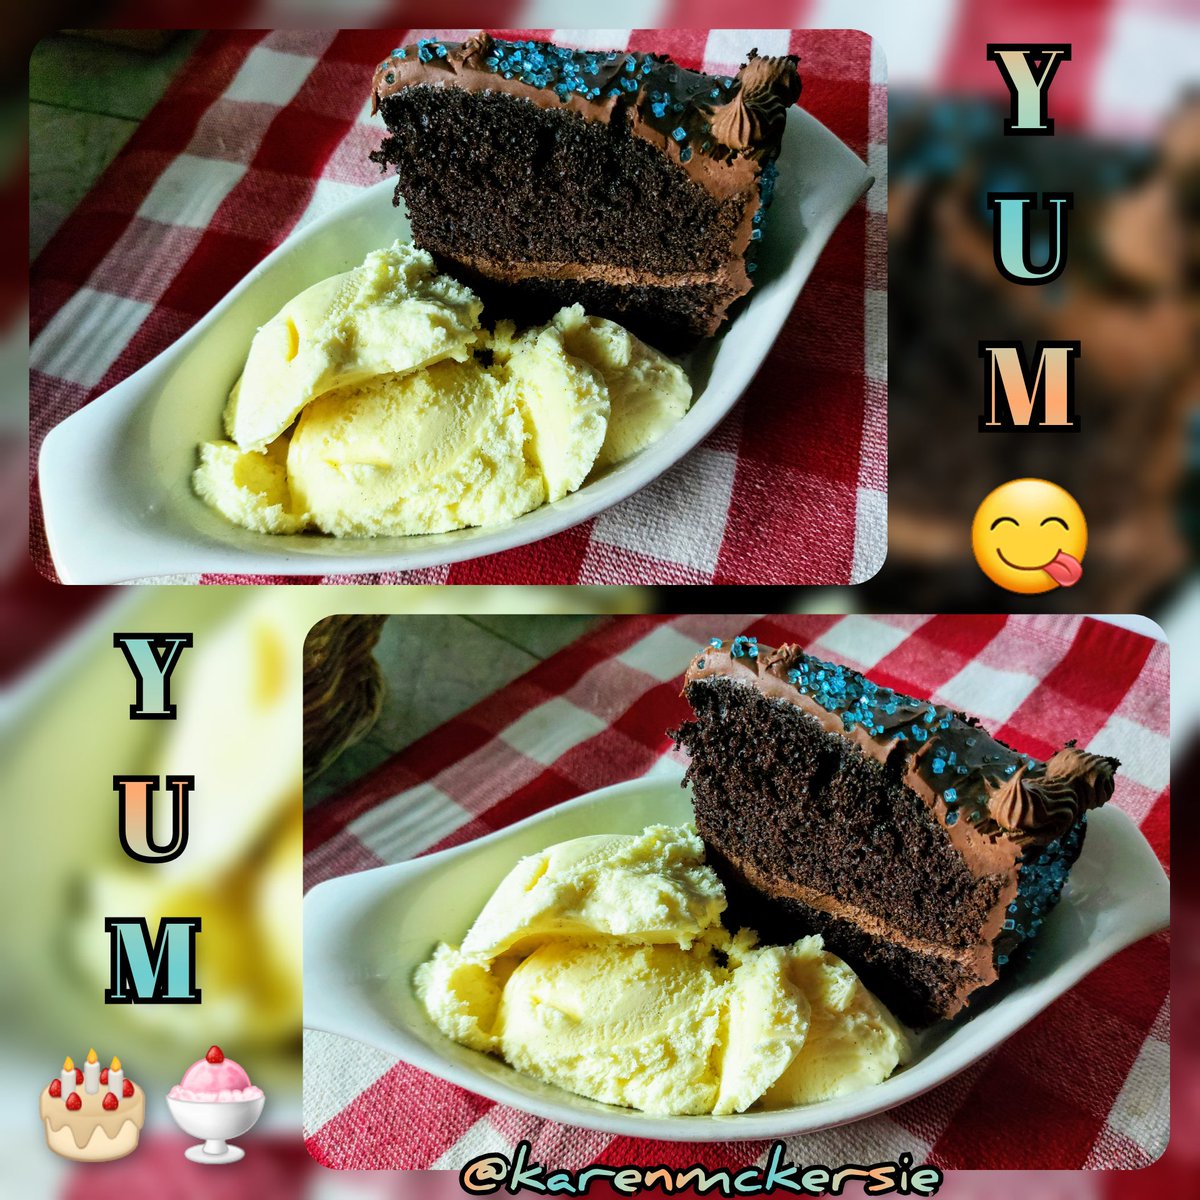 🎉 It's National Dessert Day! (Oct.14/2021)😋🎂🍨 Lets Celebrate with Some Homemade Triple Chocolate Fudge Cake & French Vanilla Ice Cream,  Delicious!😋🎂🍨 #NationalDessertDay #dessert #DessertDay #foodie #Homemade #chocolate #chocolatecake #cakeandicecream #foodblogger #sweet